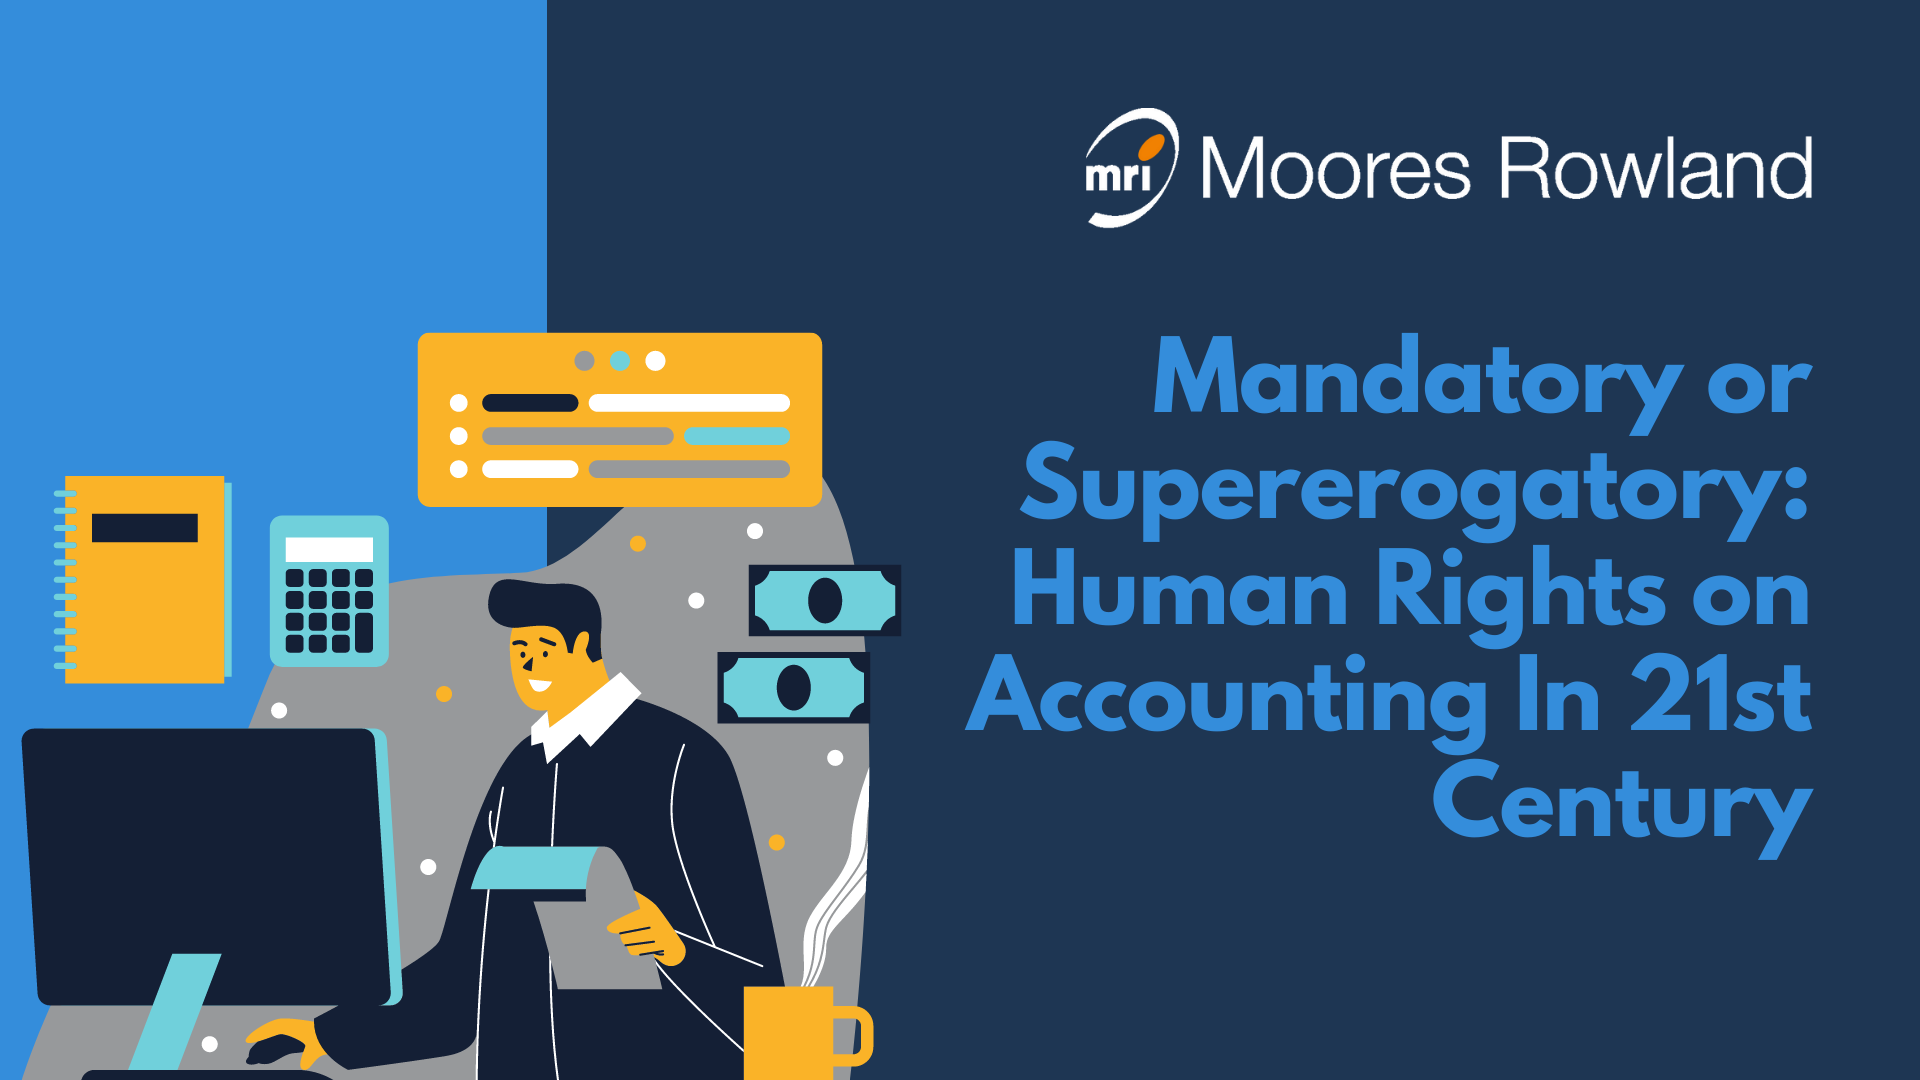 Mandatory or Supererogatory: Human Rights on Accounting In 21st Century